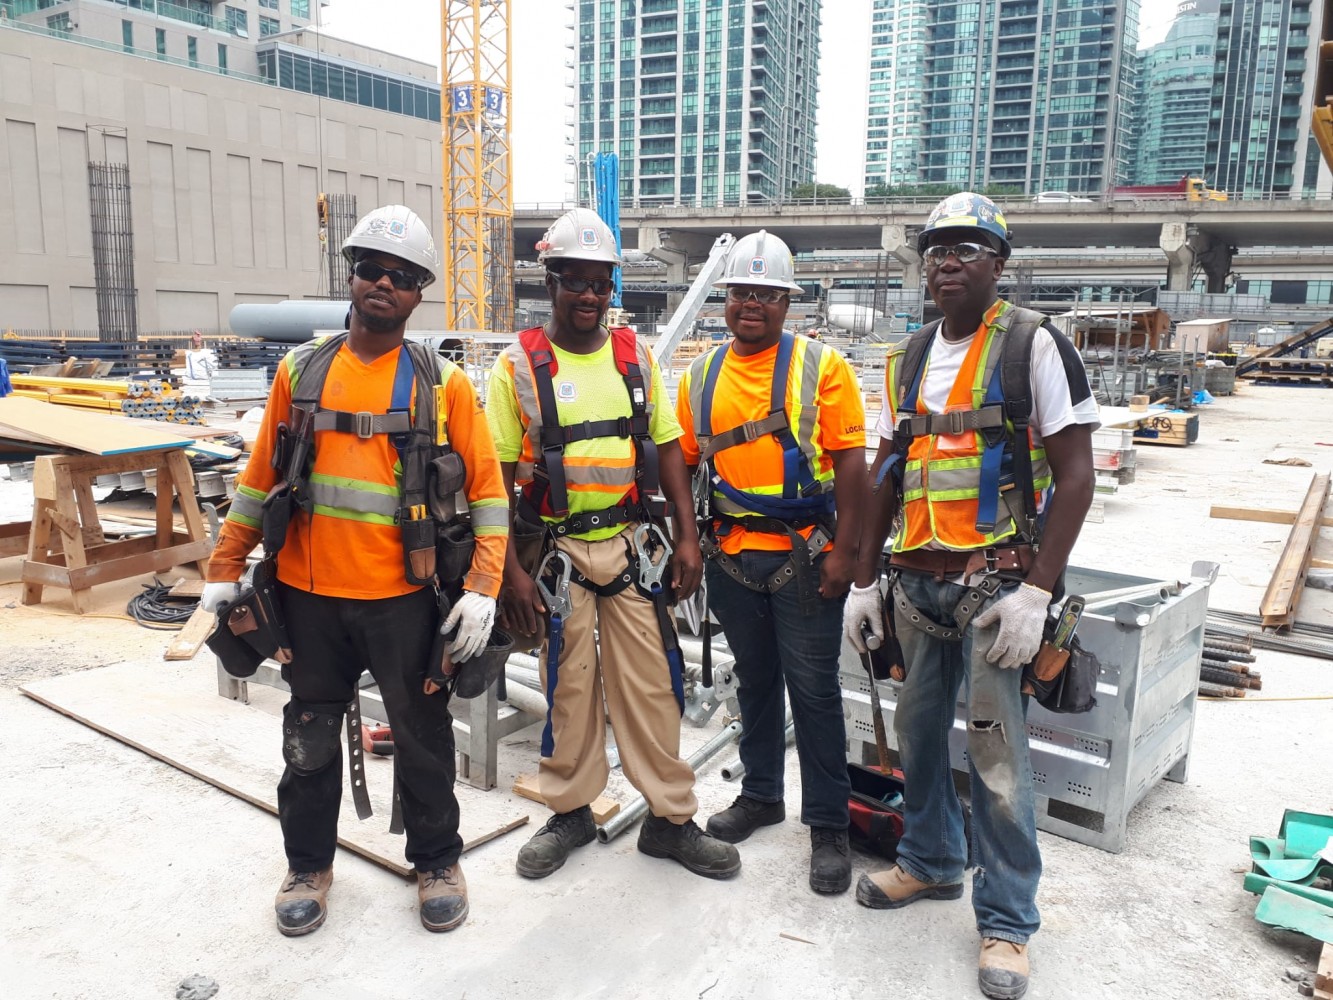 Union fights persistent problem with race on GTA construction sites